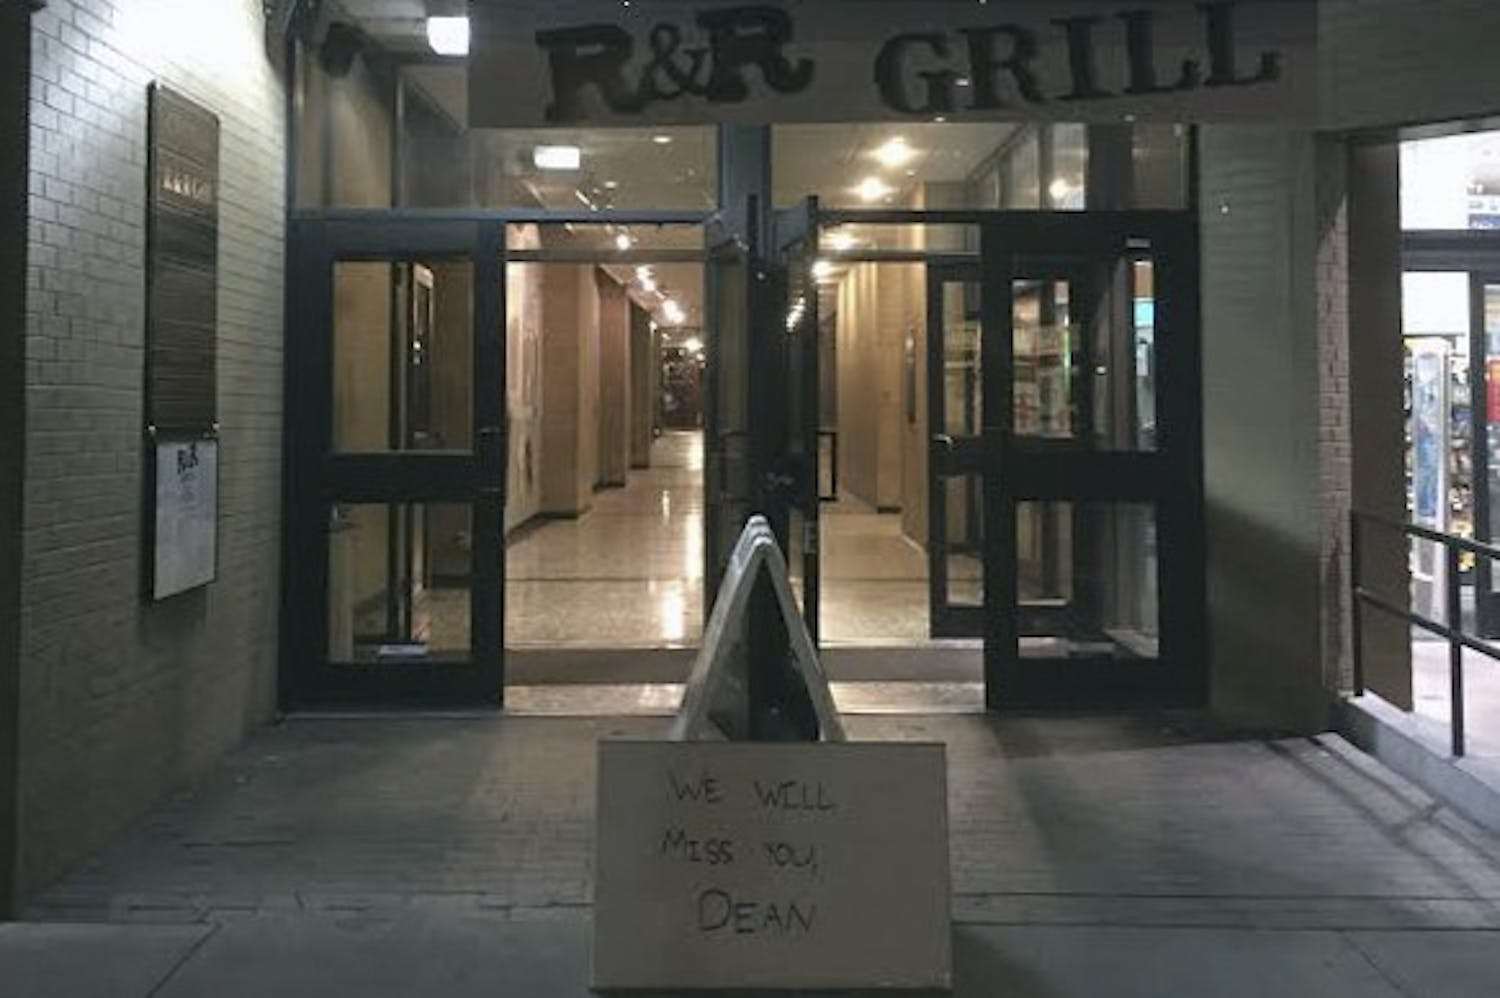 R&amp;R Grill, located at 137 E. Franklin St., put out a sign in front of the restaurant that reads, “We will miss you, Dean.”